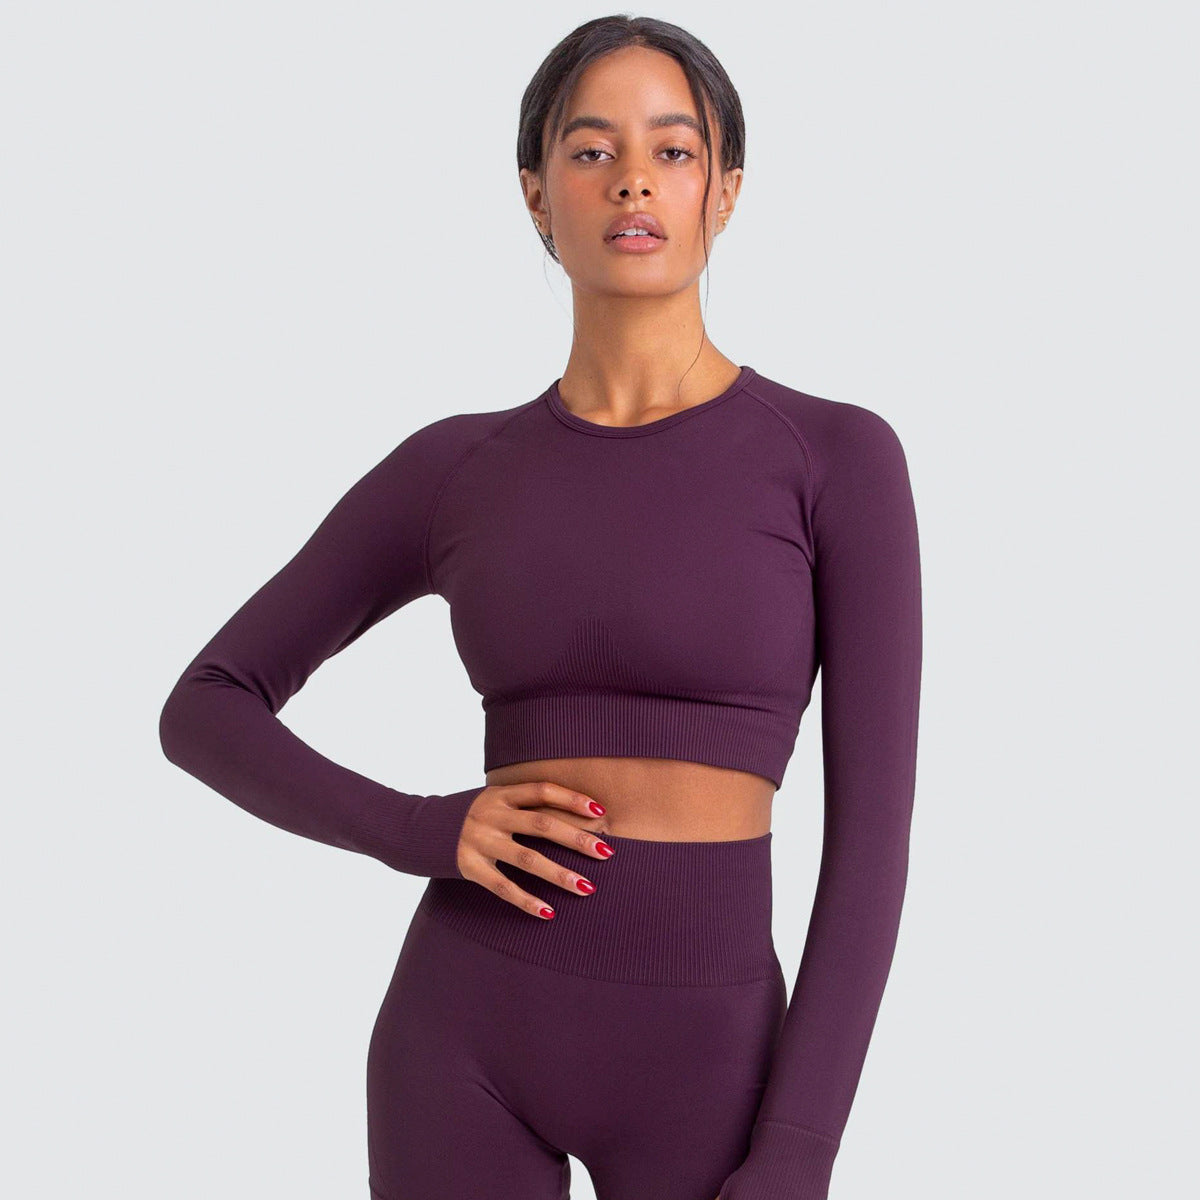 Knitted Workout Clothes | Knitted Yoga Clothes | Monkey Business Gym